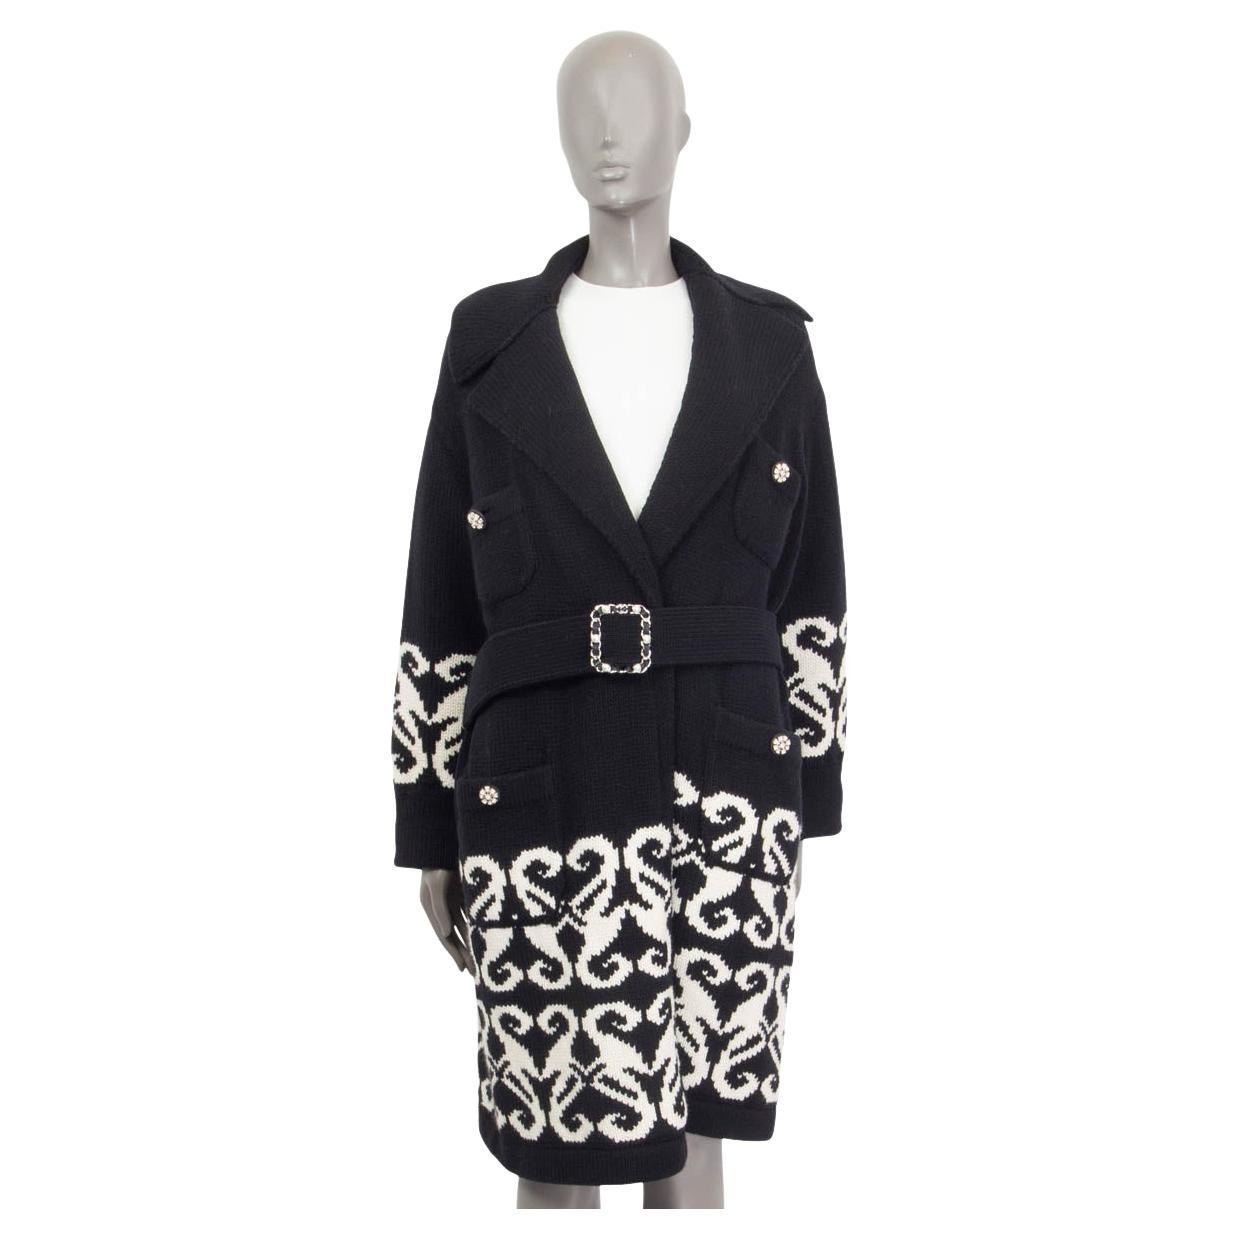 Chanel Tweed Suit With Bows  Vintage Voyage store